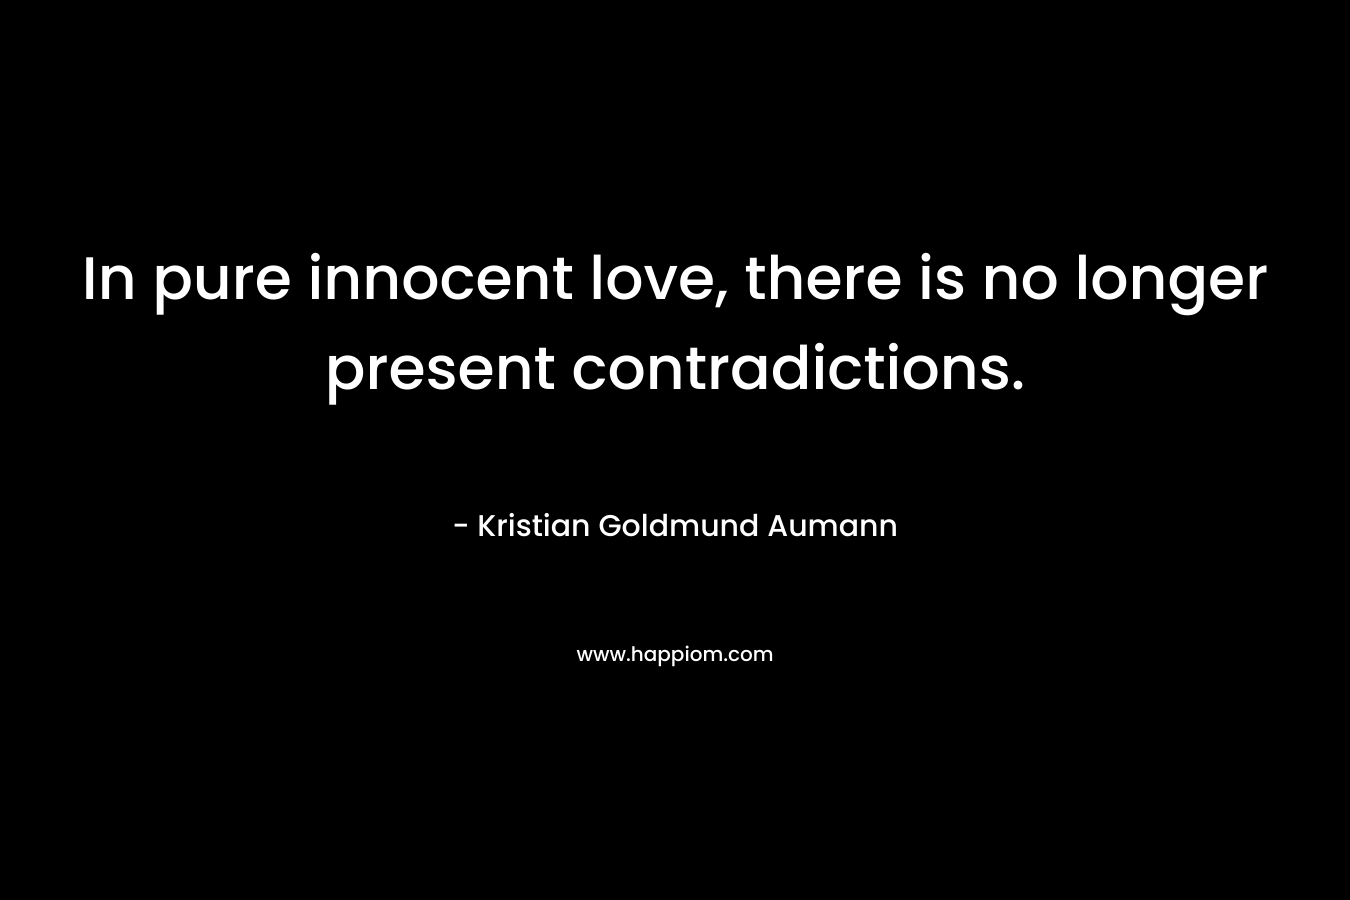 In pure innocent love, there is no longer present contradictions.